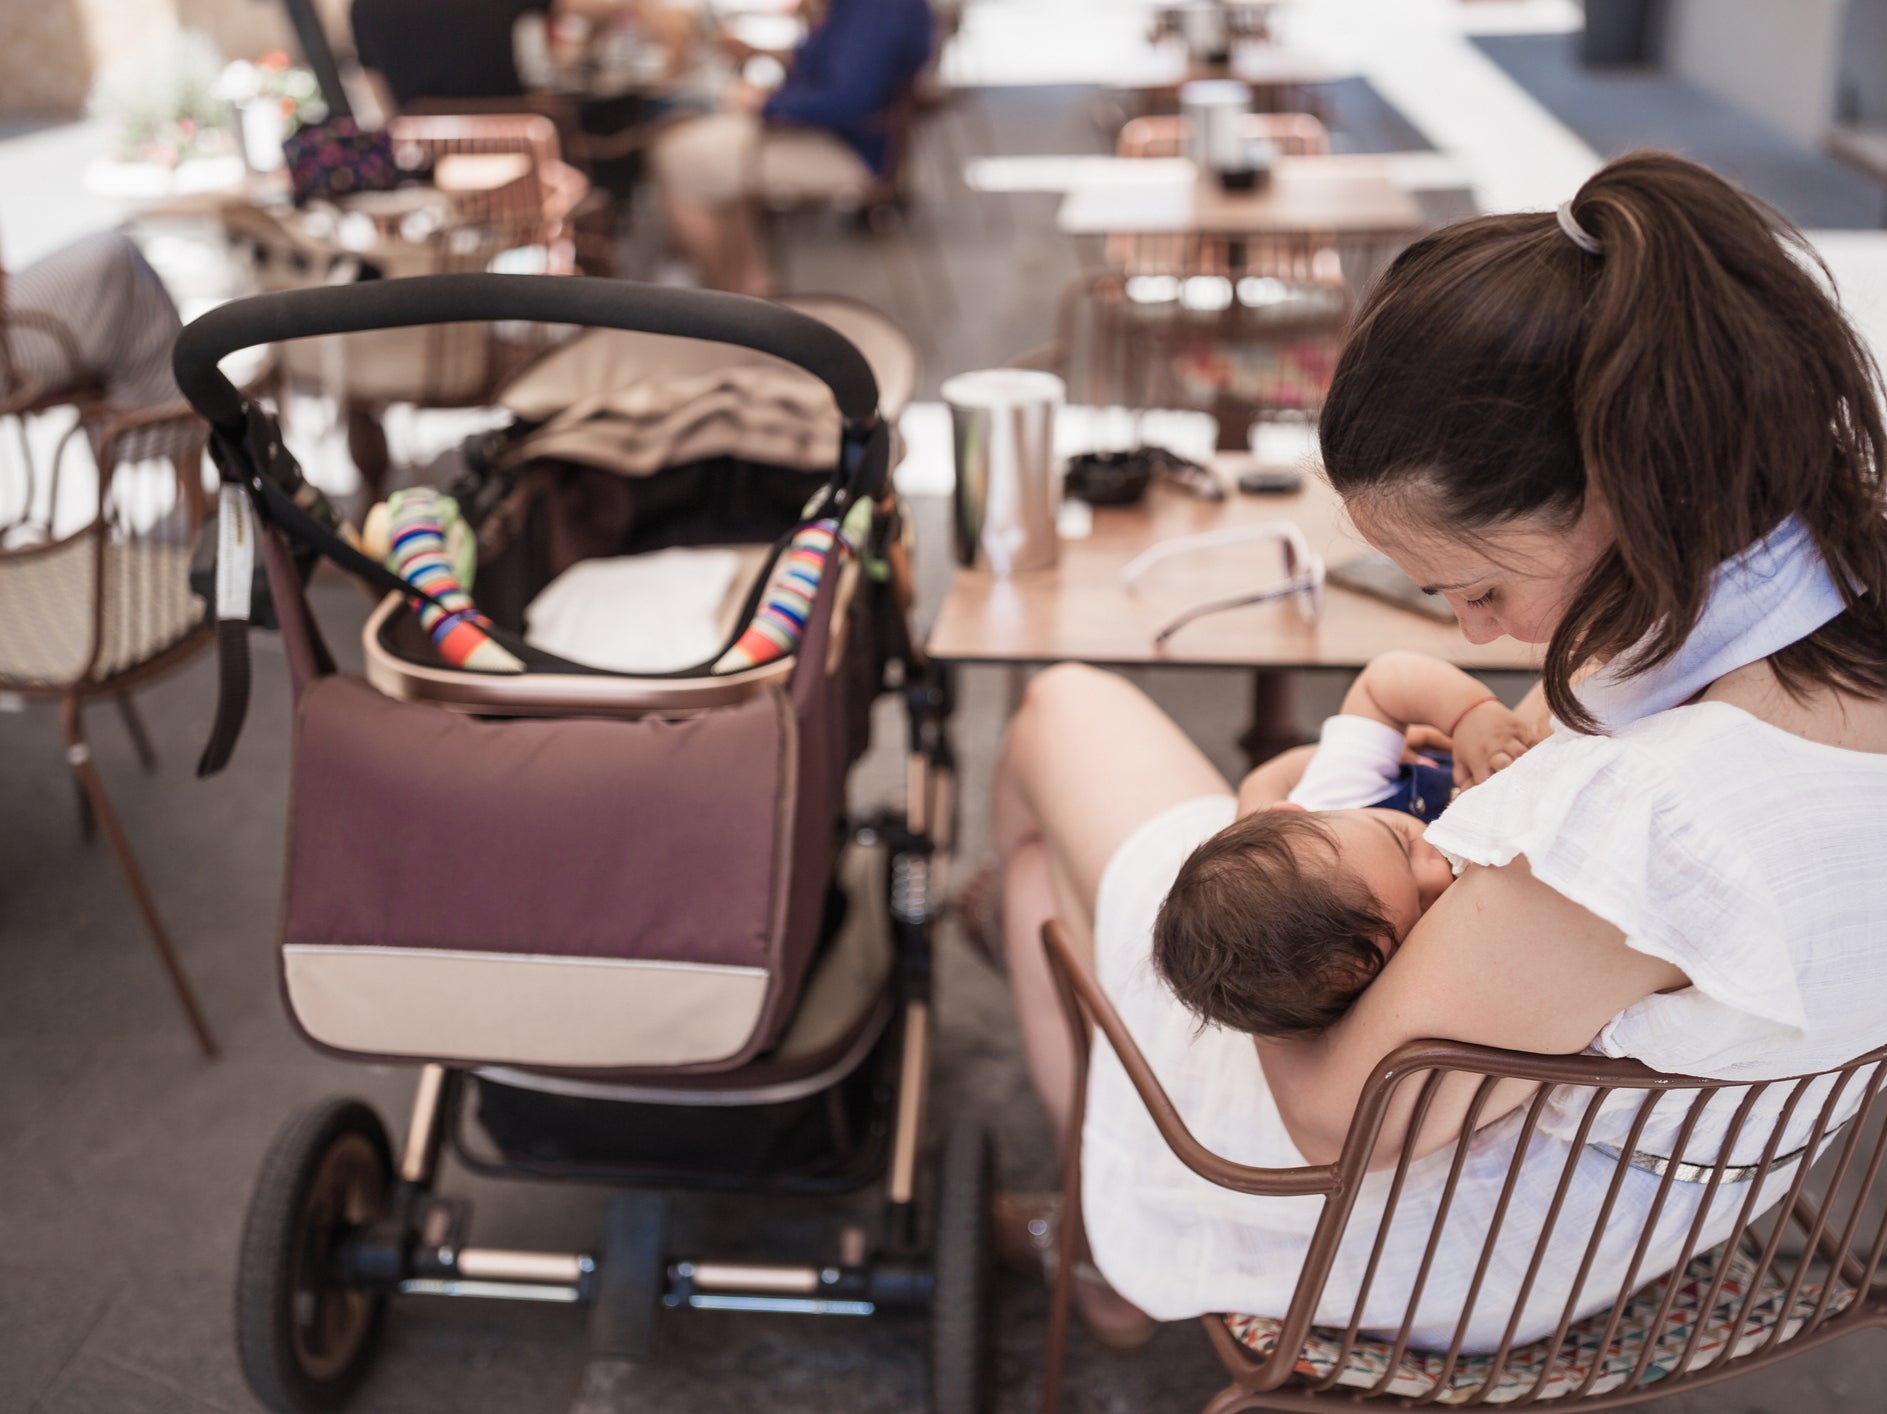 Breastfeeding mothers report increase in harassment when they feed their children in public, according to research by Elvie